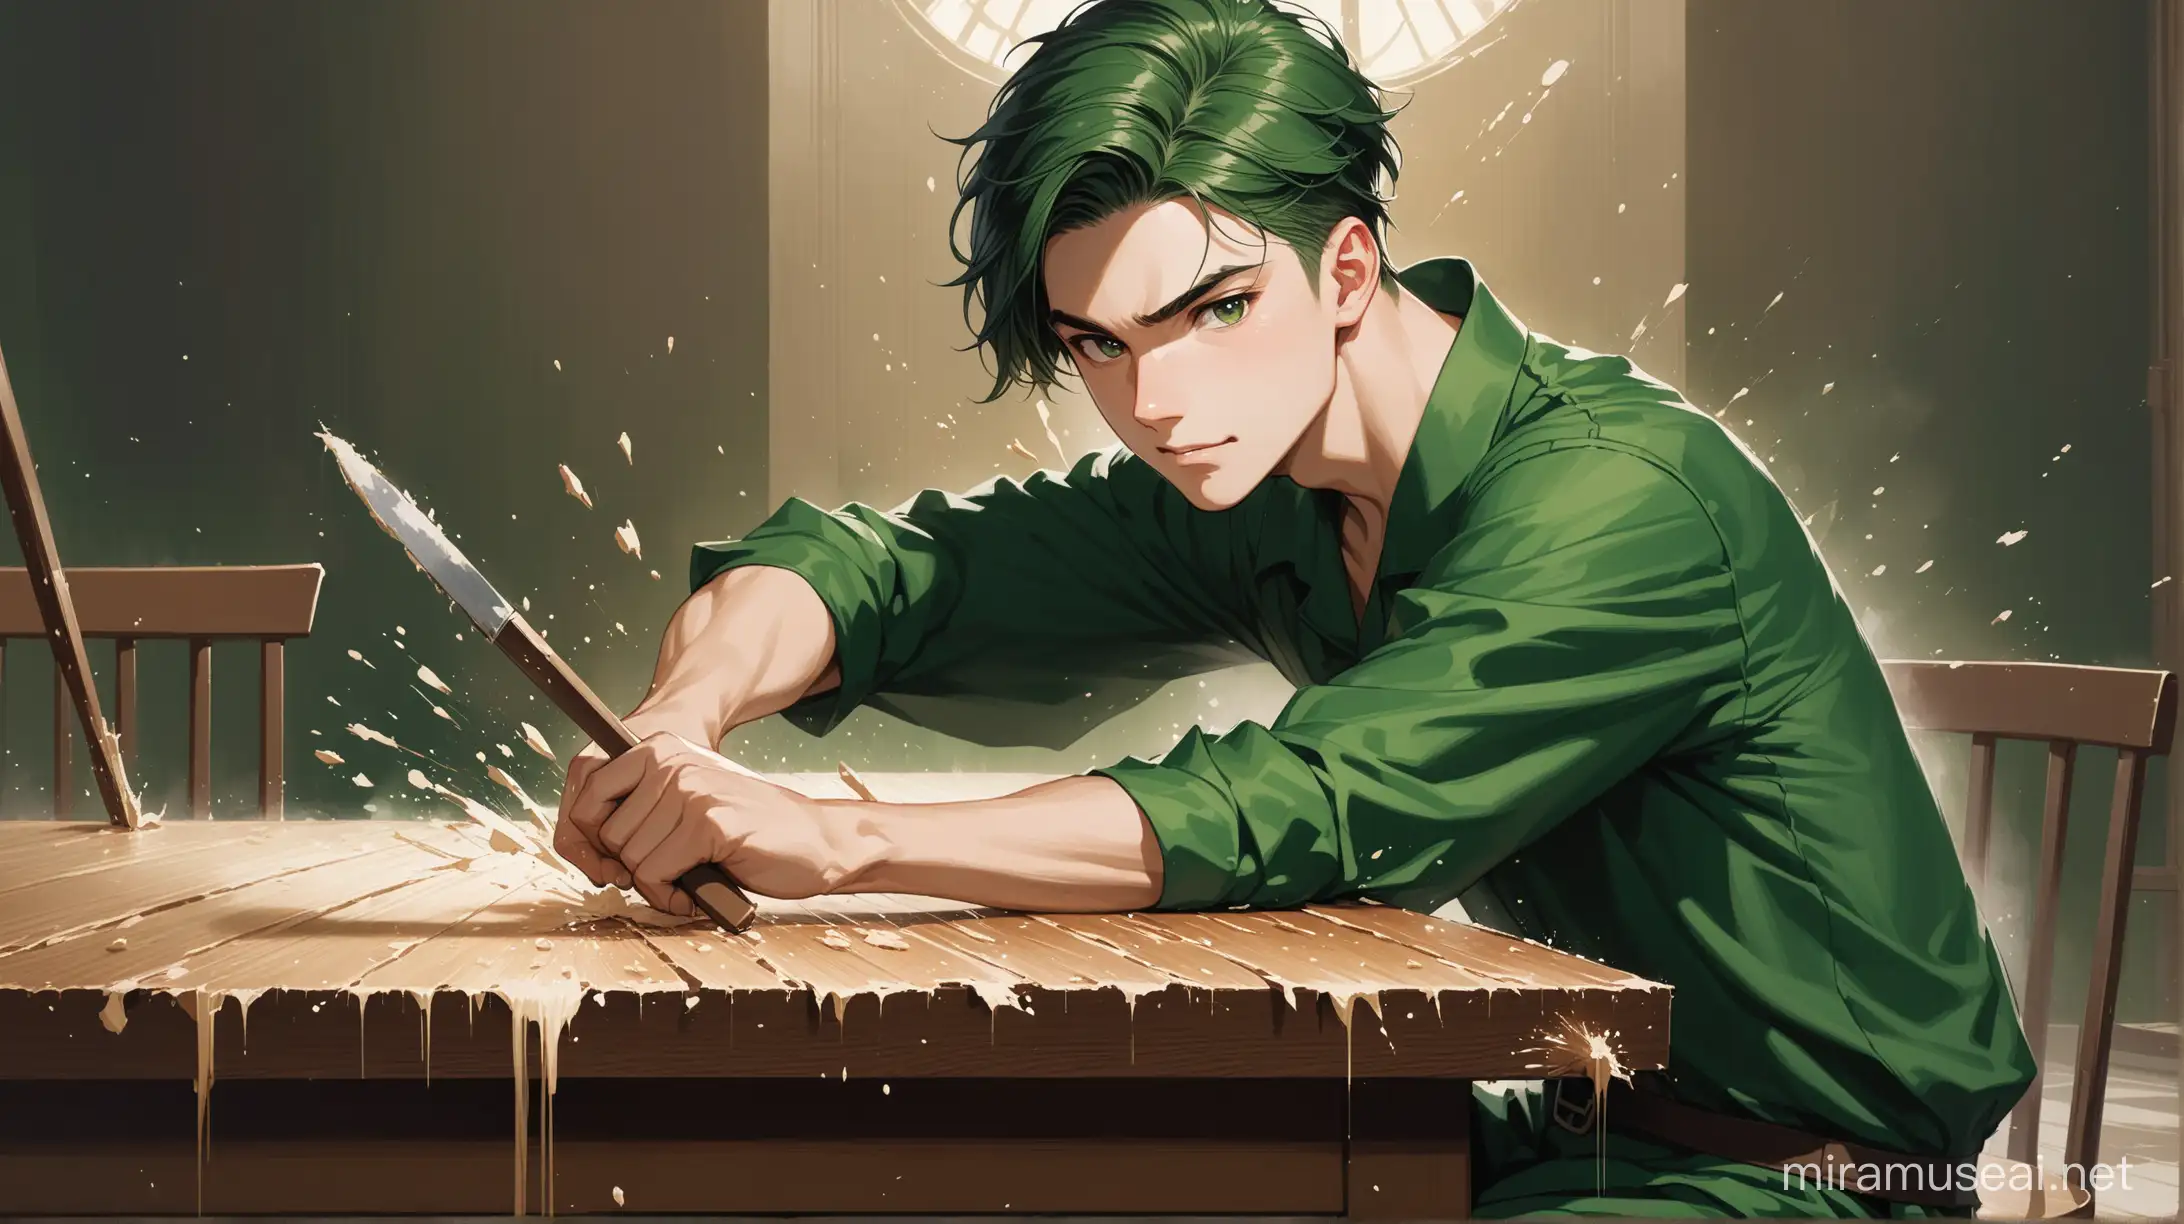 Young Man in Dark Green Clothes Smashing a Table in Anger